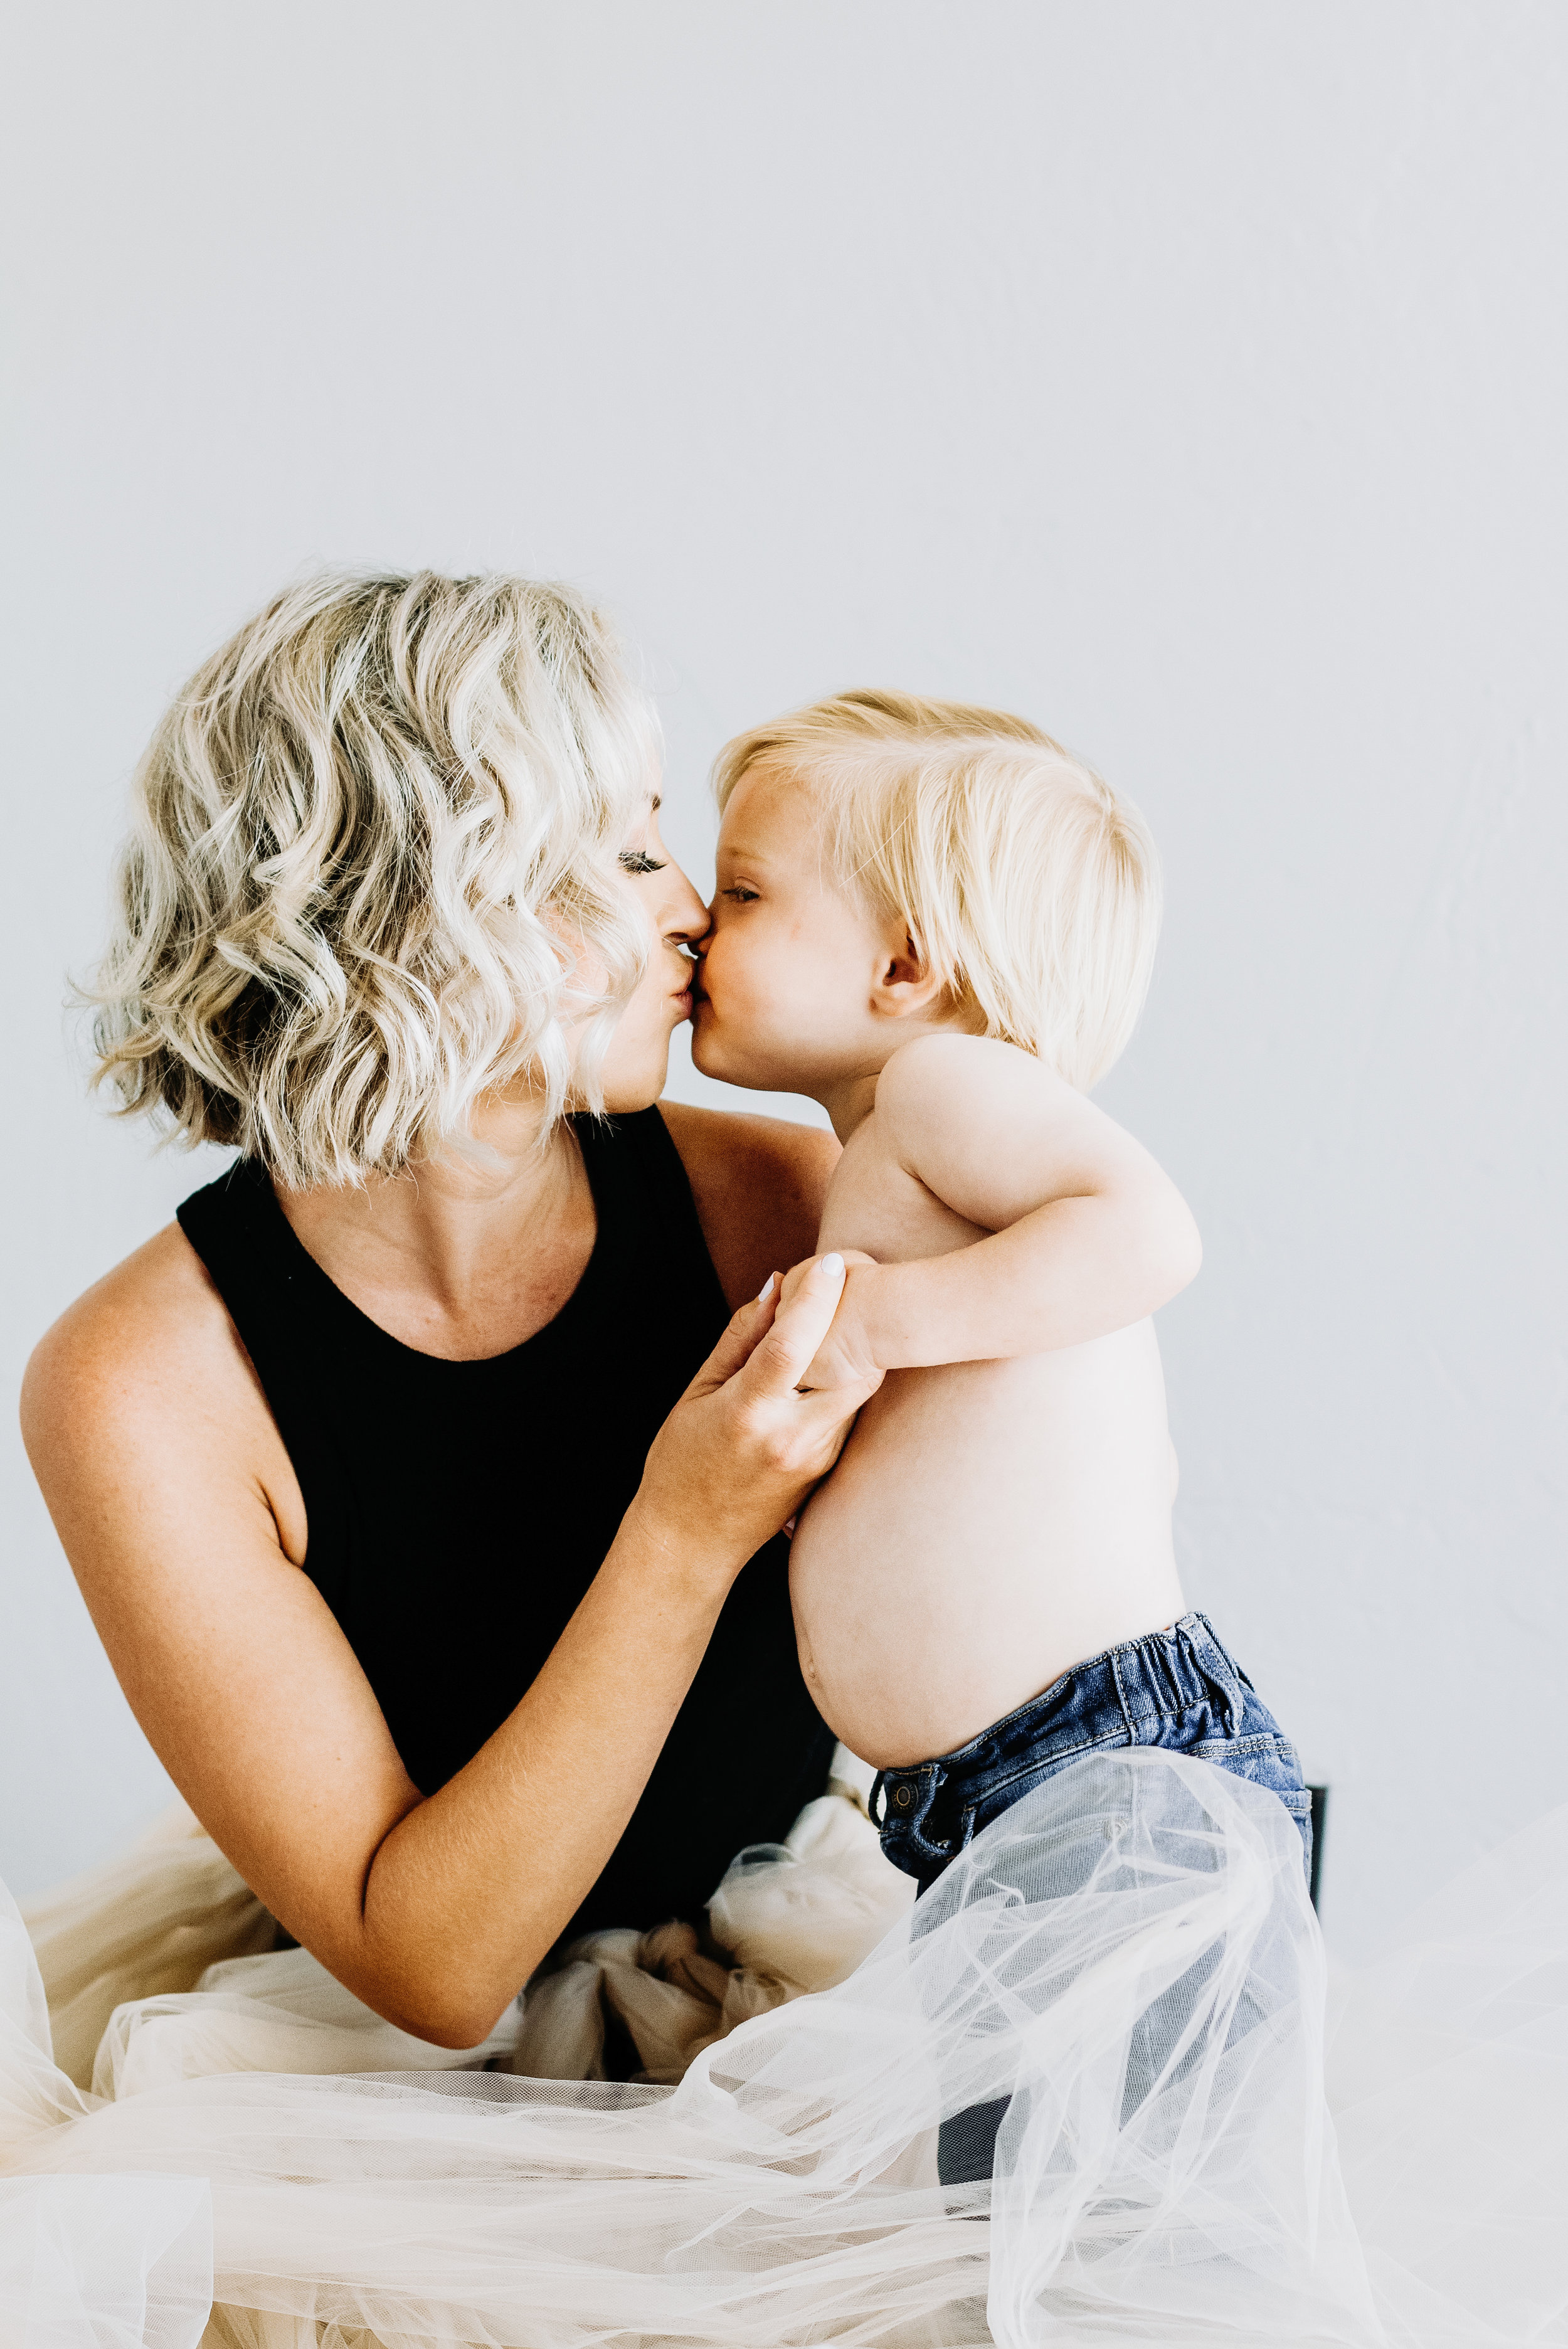 San Diego Portrait Photography | Mommy and Me Shoots